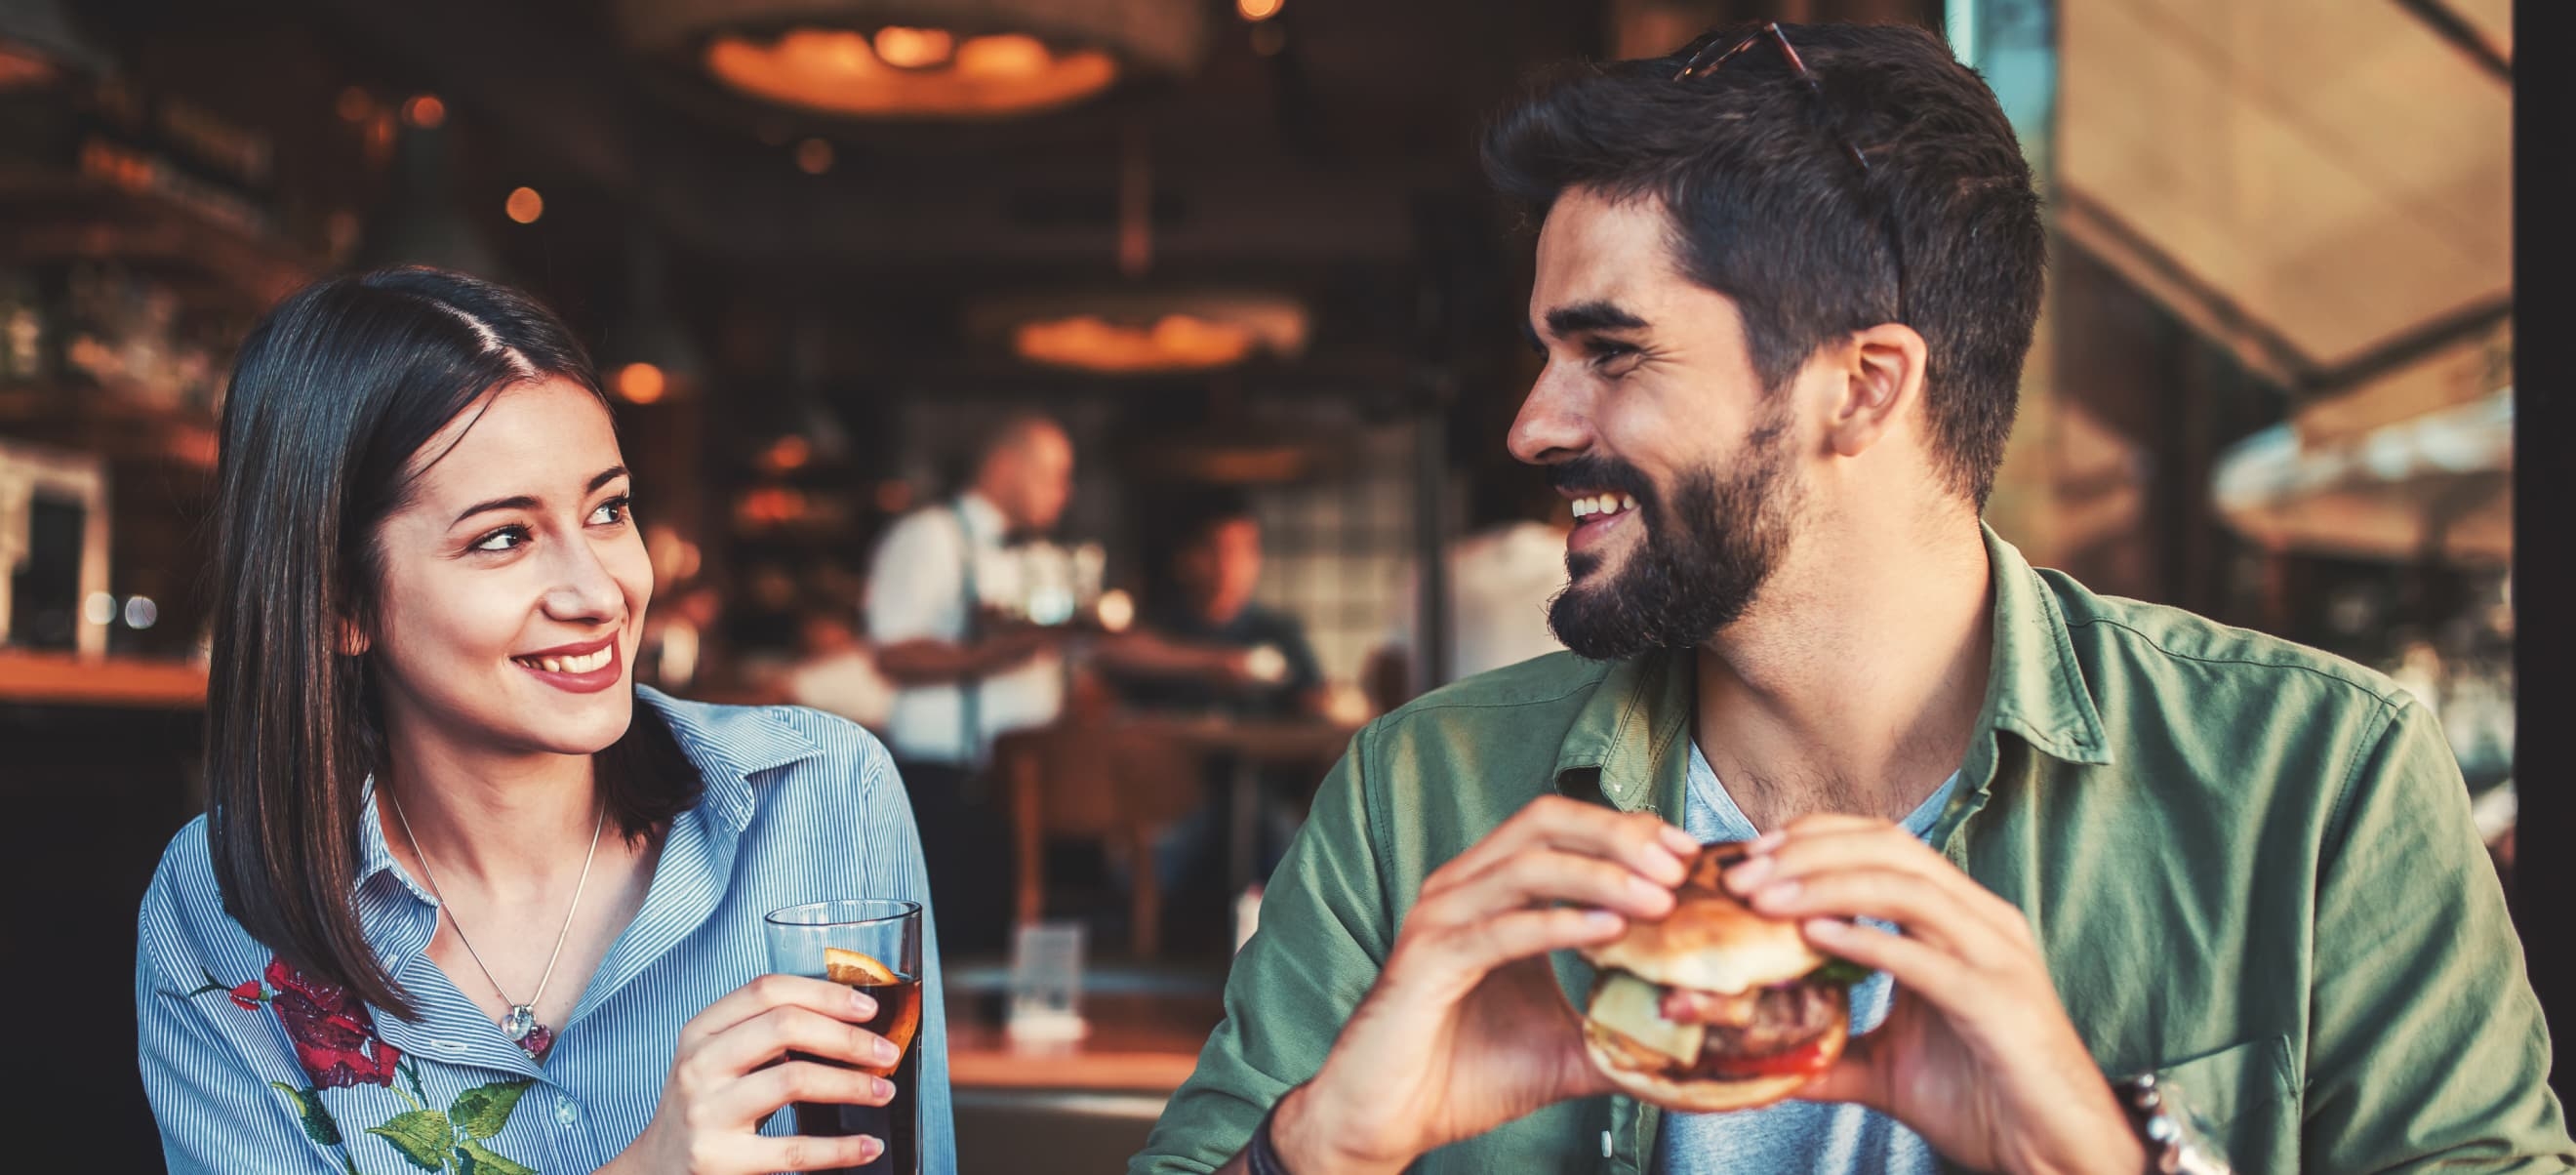 A woman and man are sitting at an Applebee's restaurant. The woman is holding a drink, smiling at the man, who is holding a burger. The background shows a bar with another person in the distance.